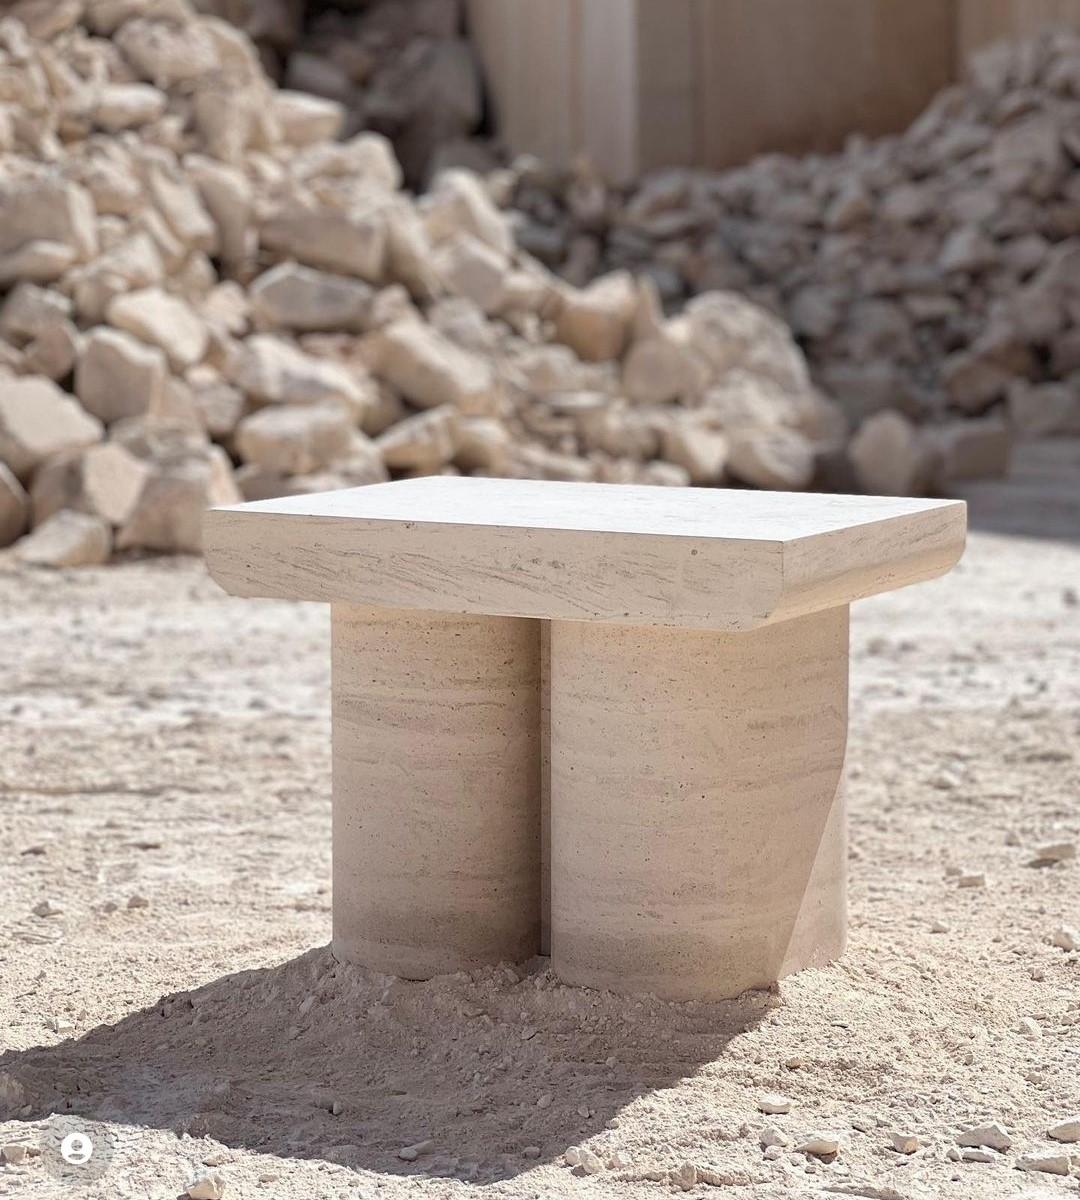 MOR side table & stool by Samuel Dos Santos
Materials: Limestone. Honed finishing.
Dimensions: W 48 x D 48 x H 66 cm

MOR it´s the new side table/stool designed by Samuel Dos Santos for Olivah. It´s inspired by the atmosphere and proportions of